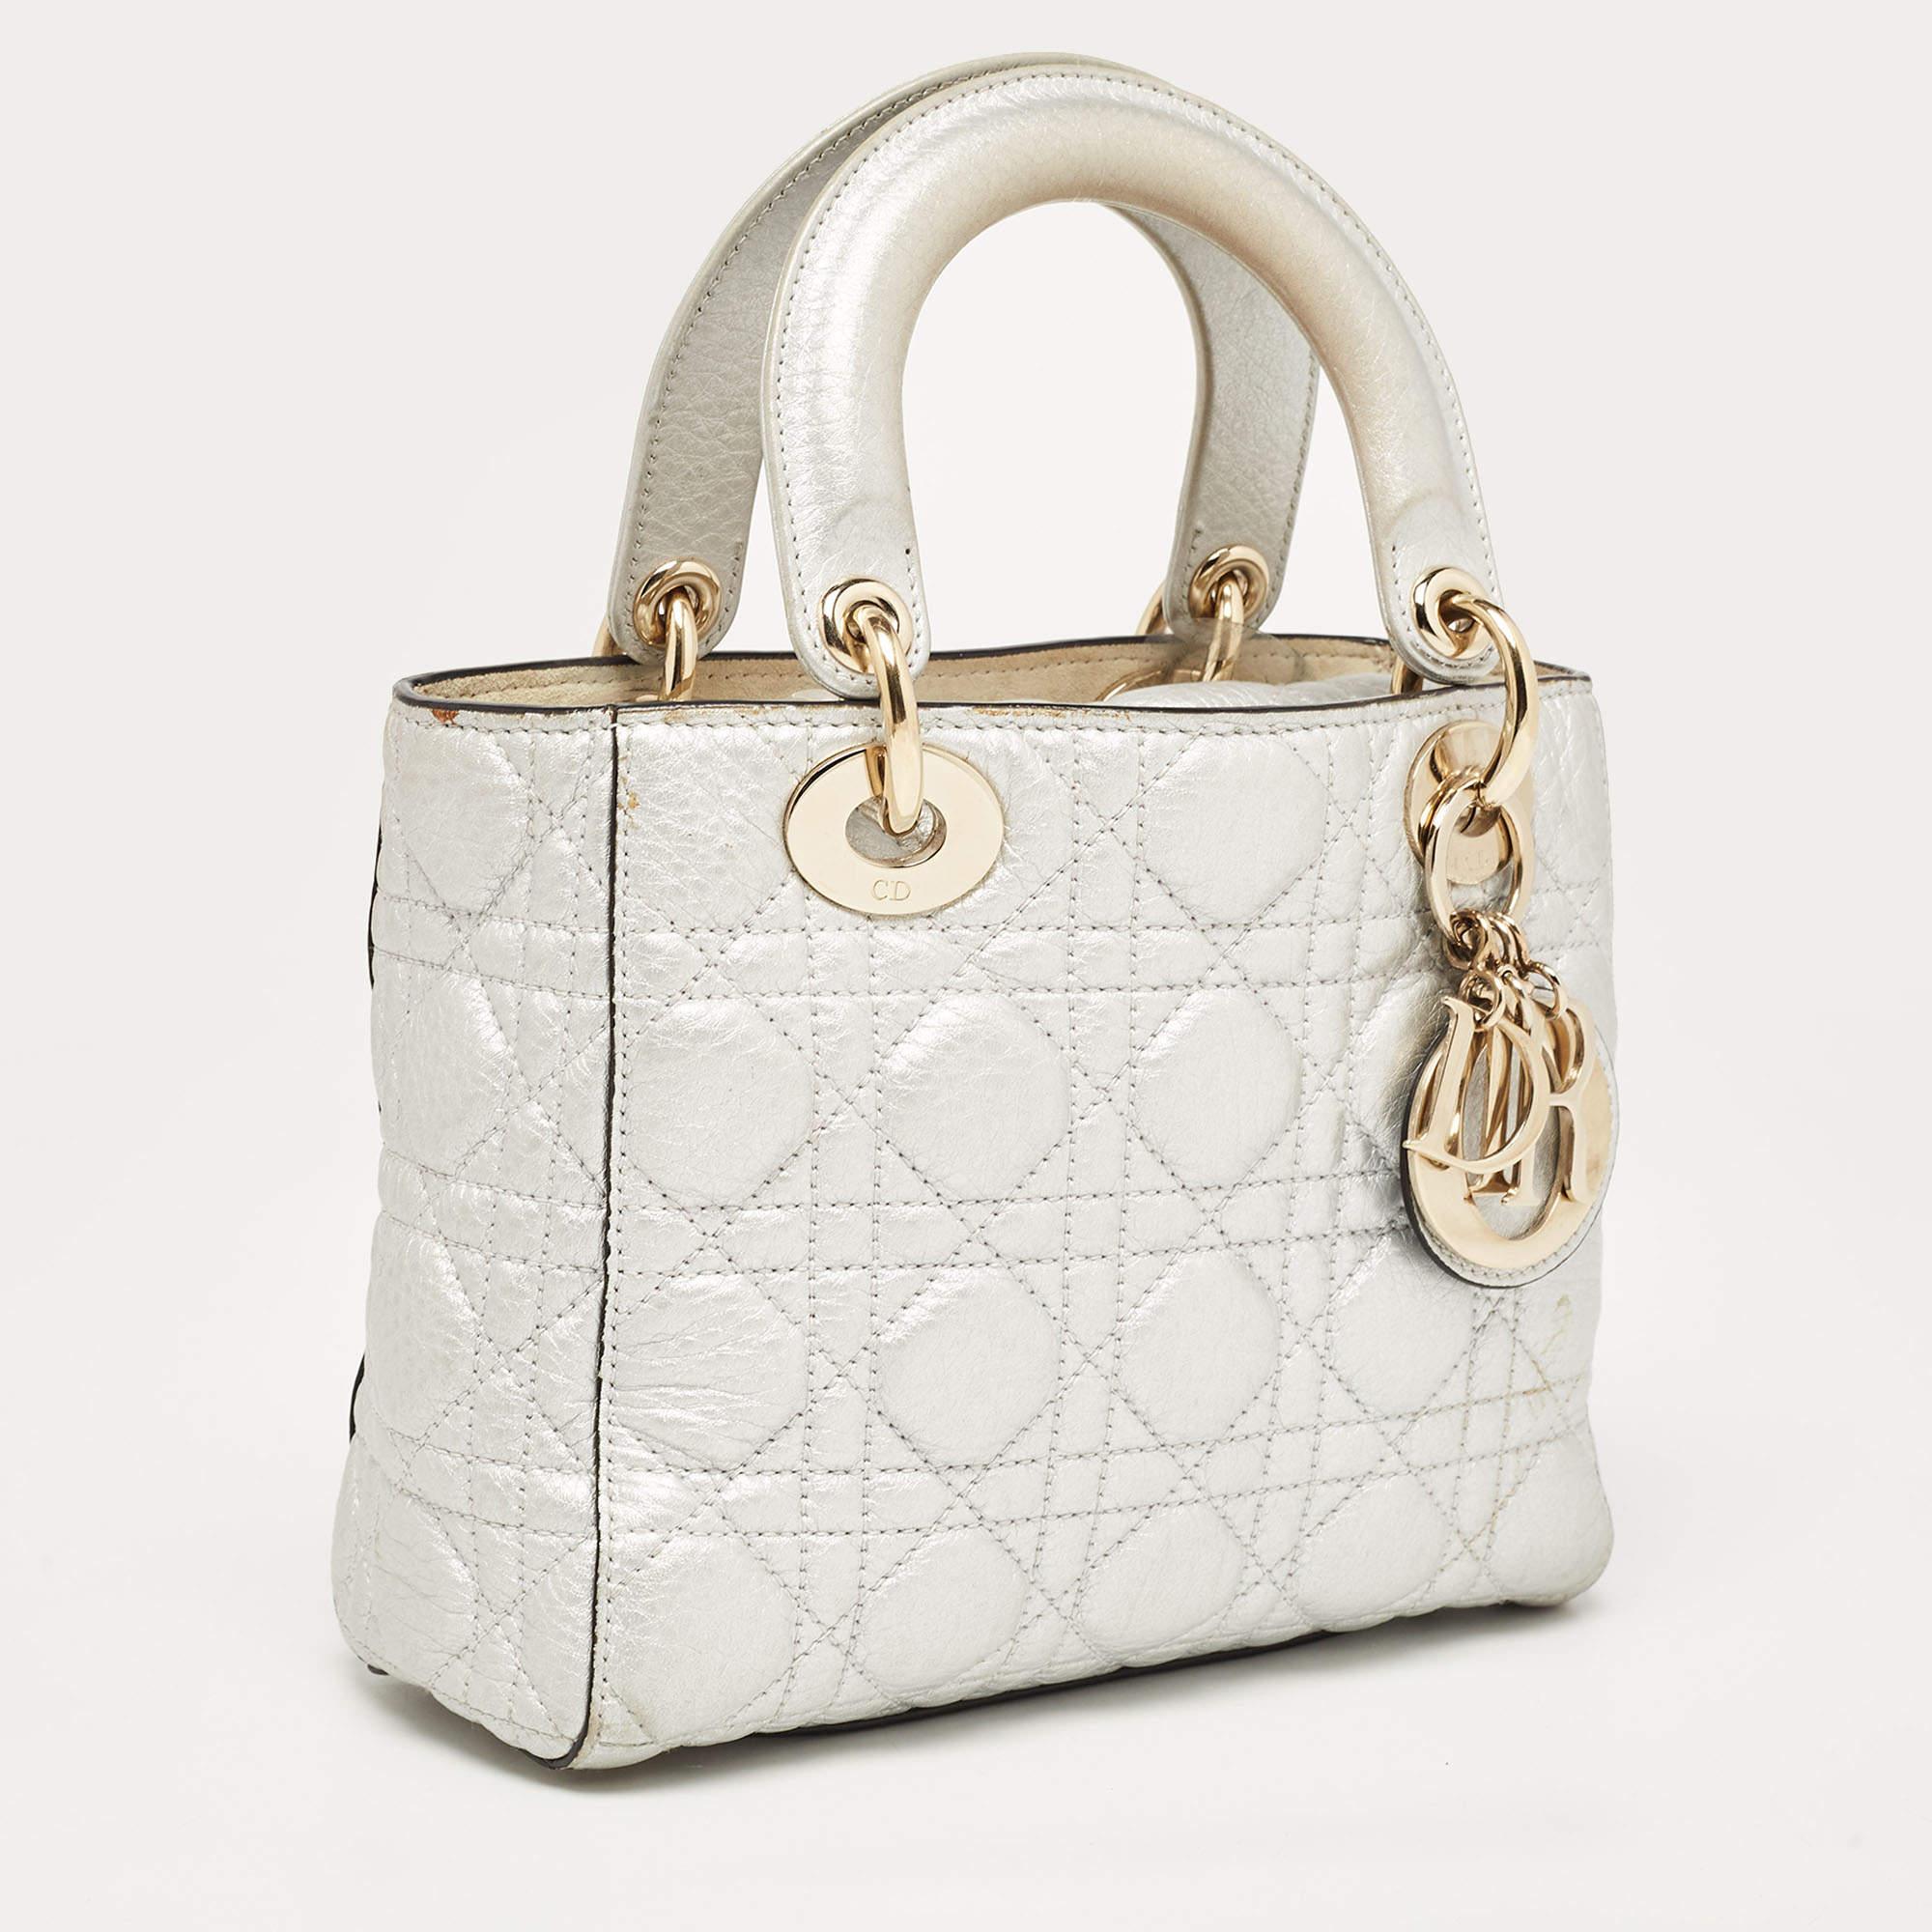 A timeless status and great design mark the Lady Dior tote. It is an iconic bag that people continue to invest in to this day. We have here this Lady Dior in silver. It's light, cute, and super pretty.

